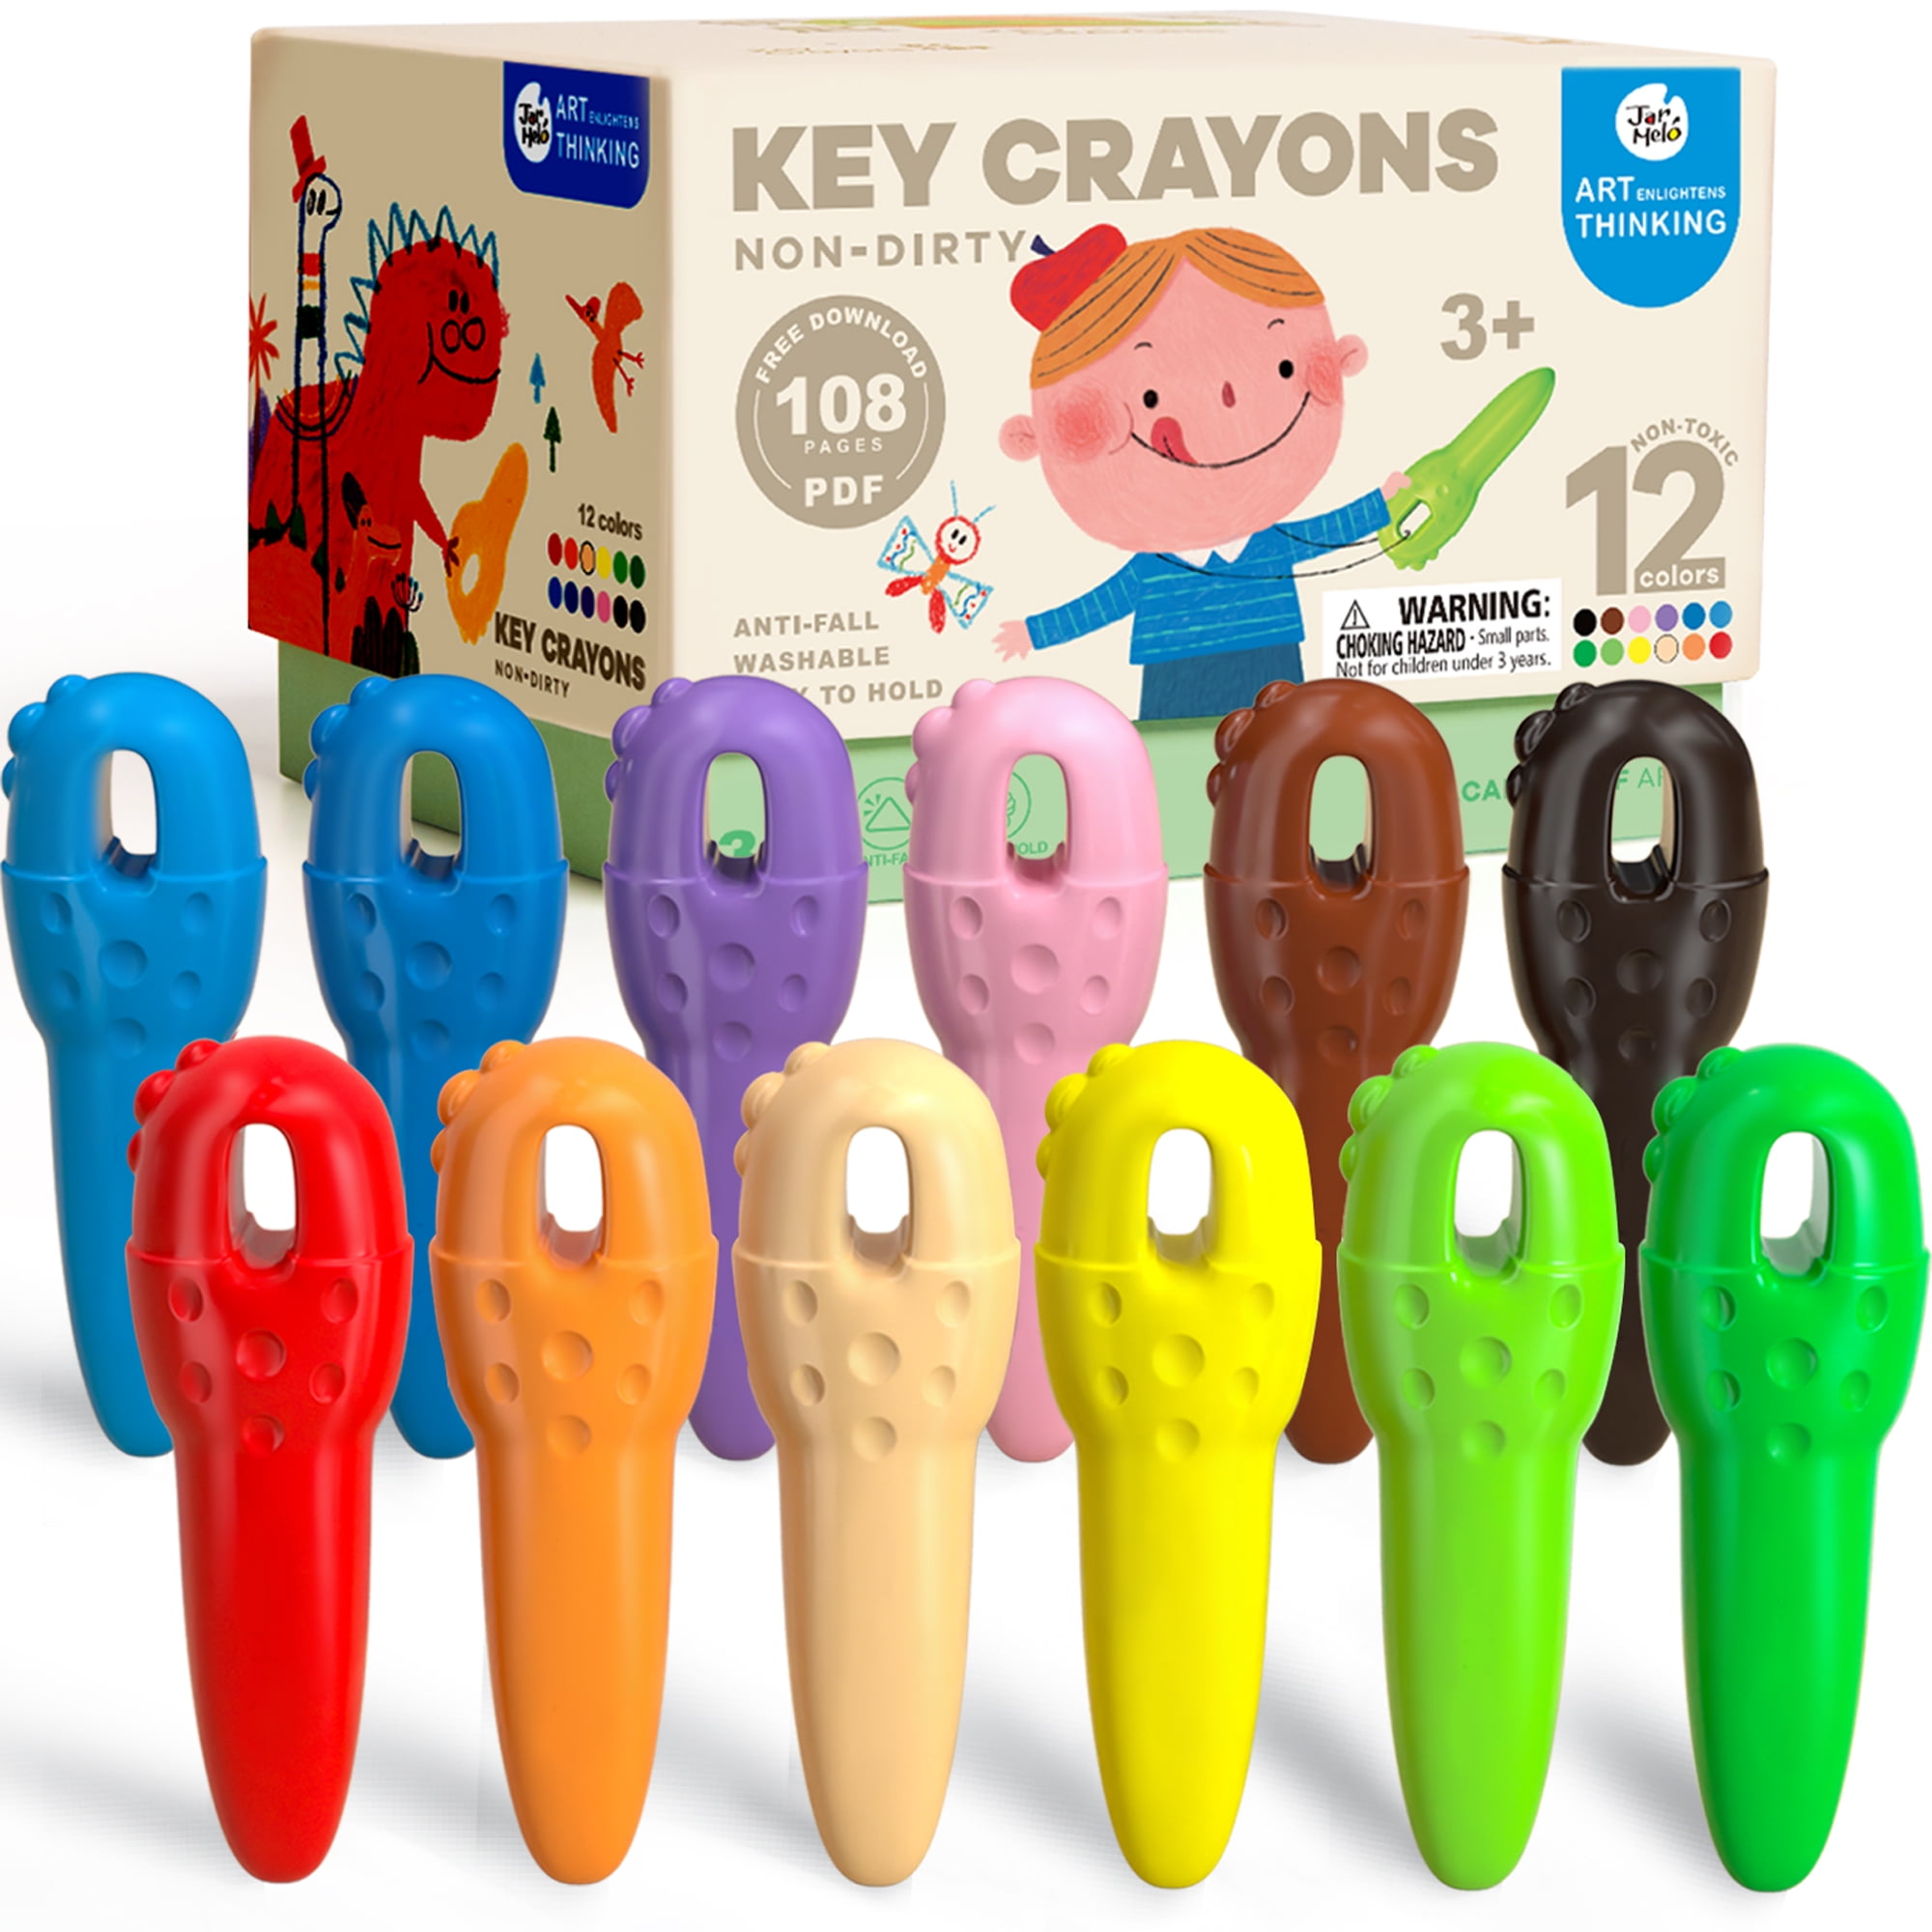 Jar Melo Key Crayons for Toddlers, 12 Colors Washable Toddler Crayons with  108 Free E-book PDF Download, Non-Toxic for Ages1-8, Coloring Art Supplies  Easter Gifts 